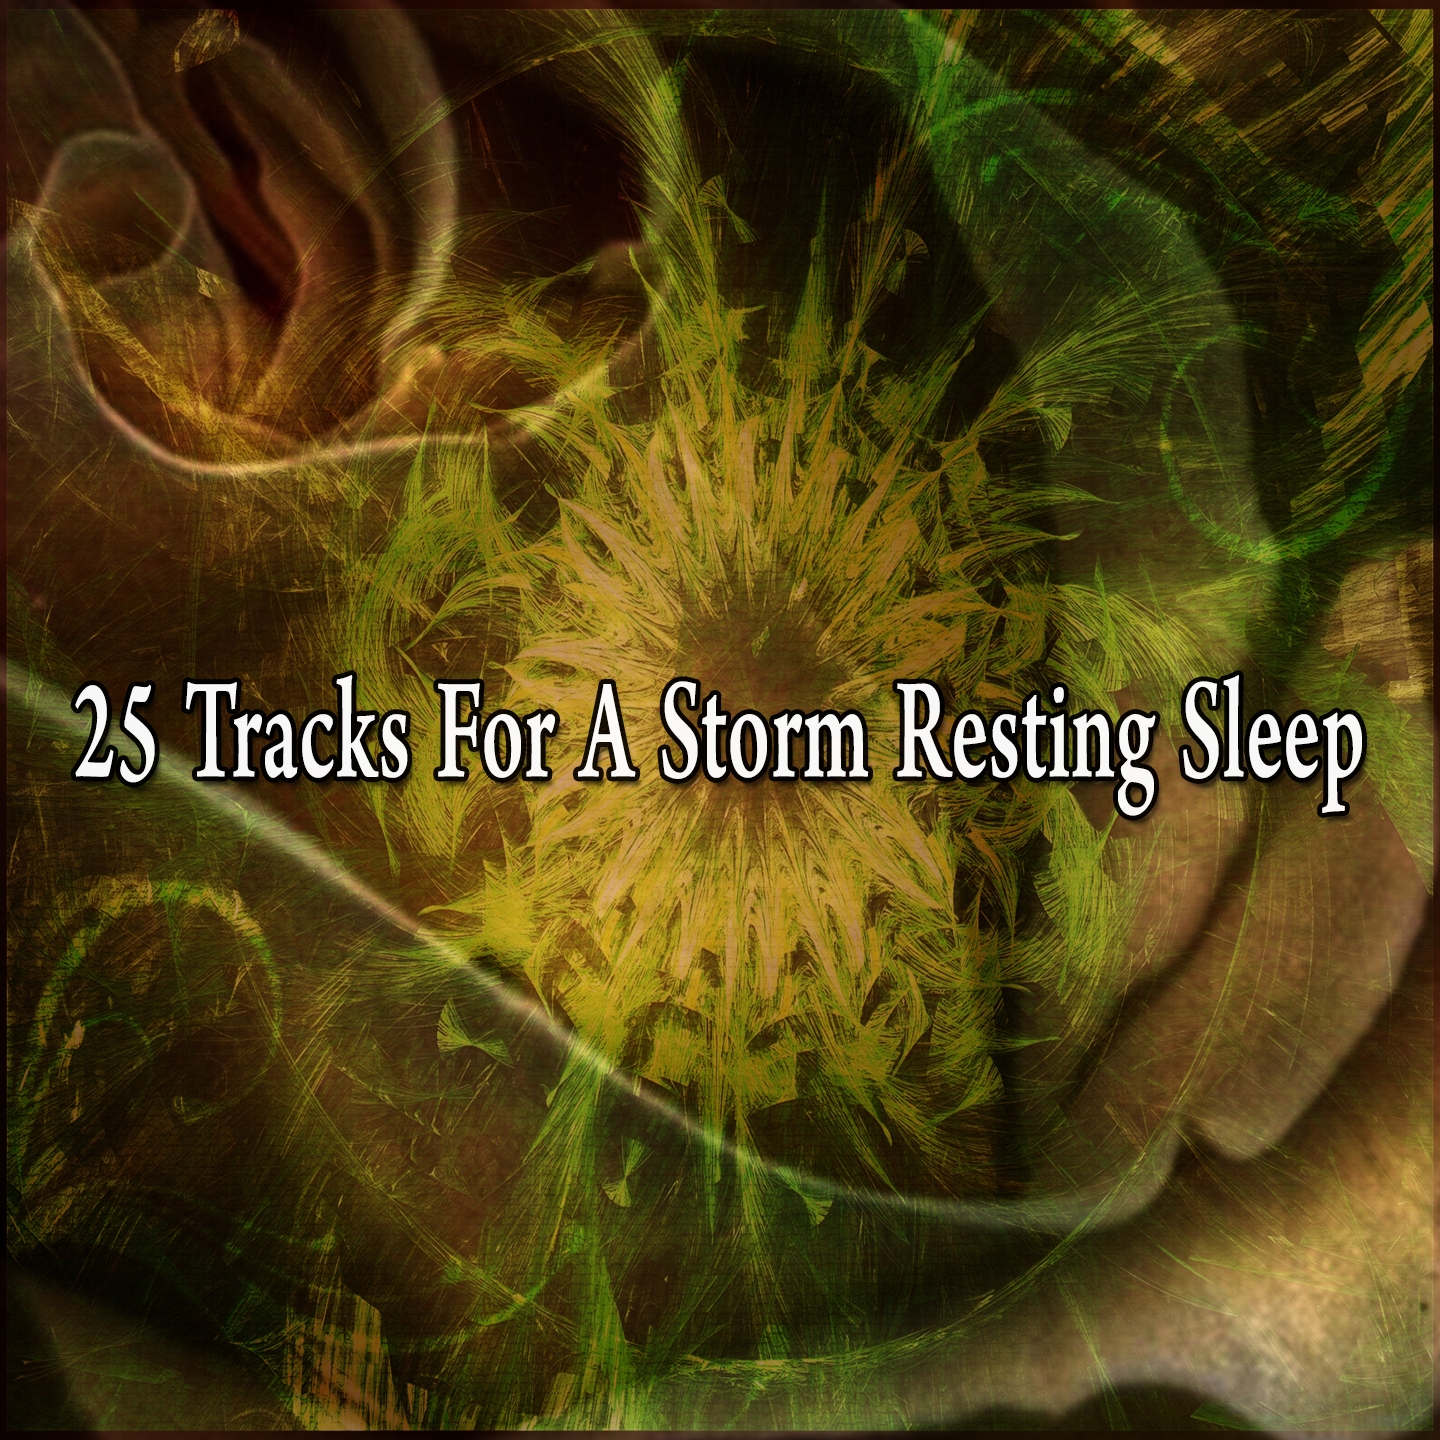 25 Tracks For A Storm Resting Sleep